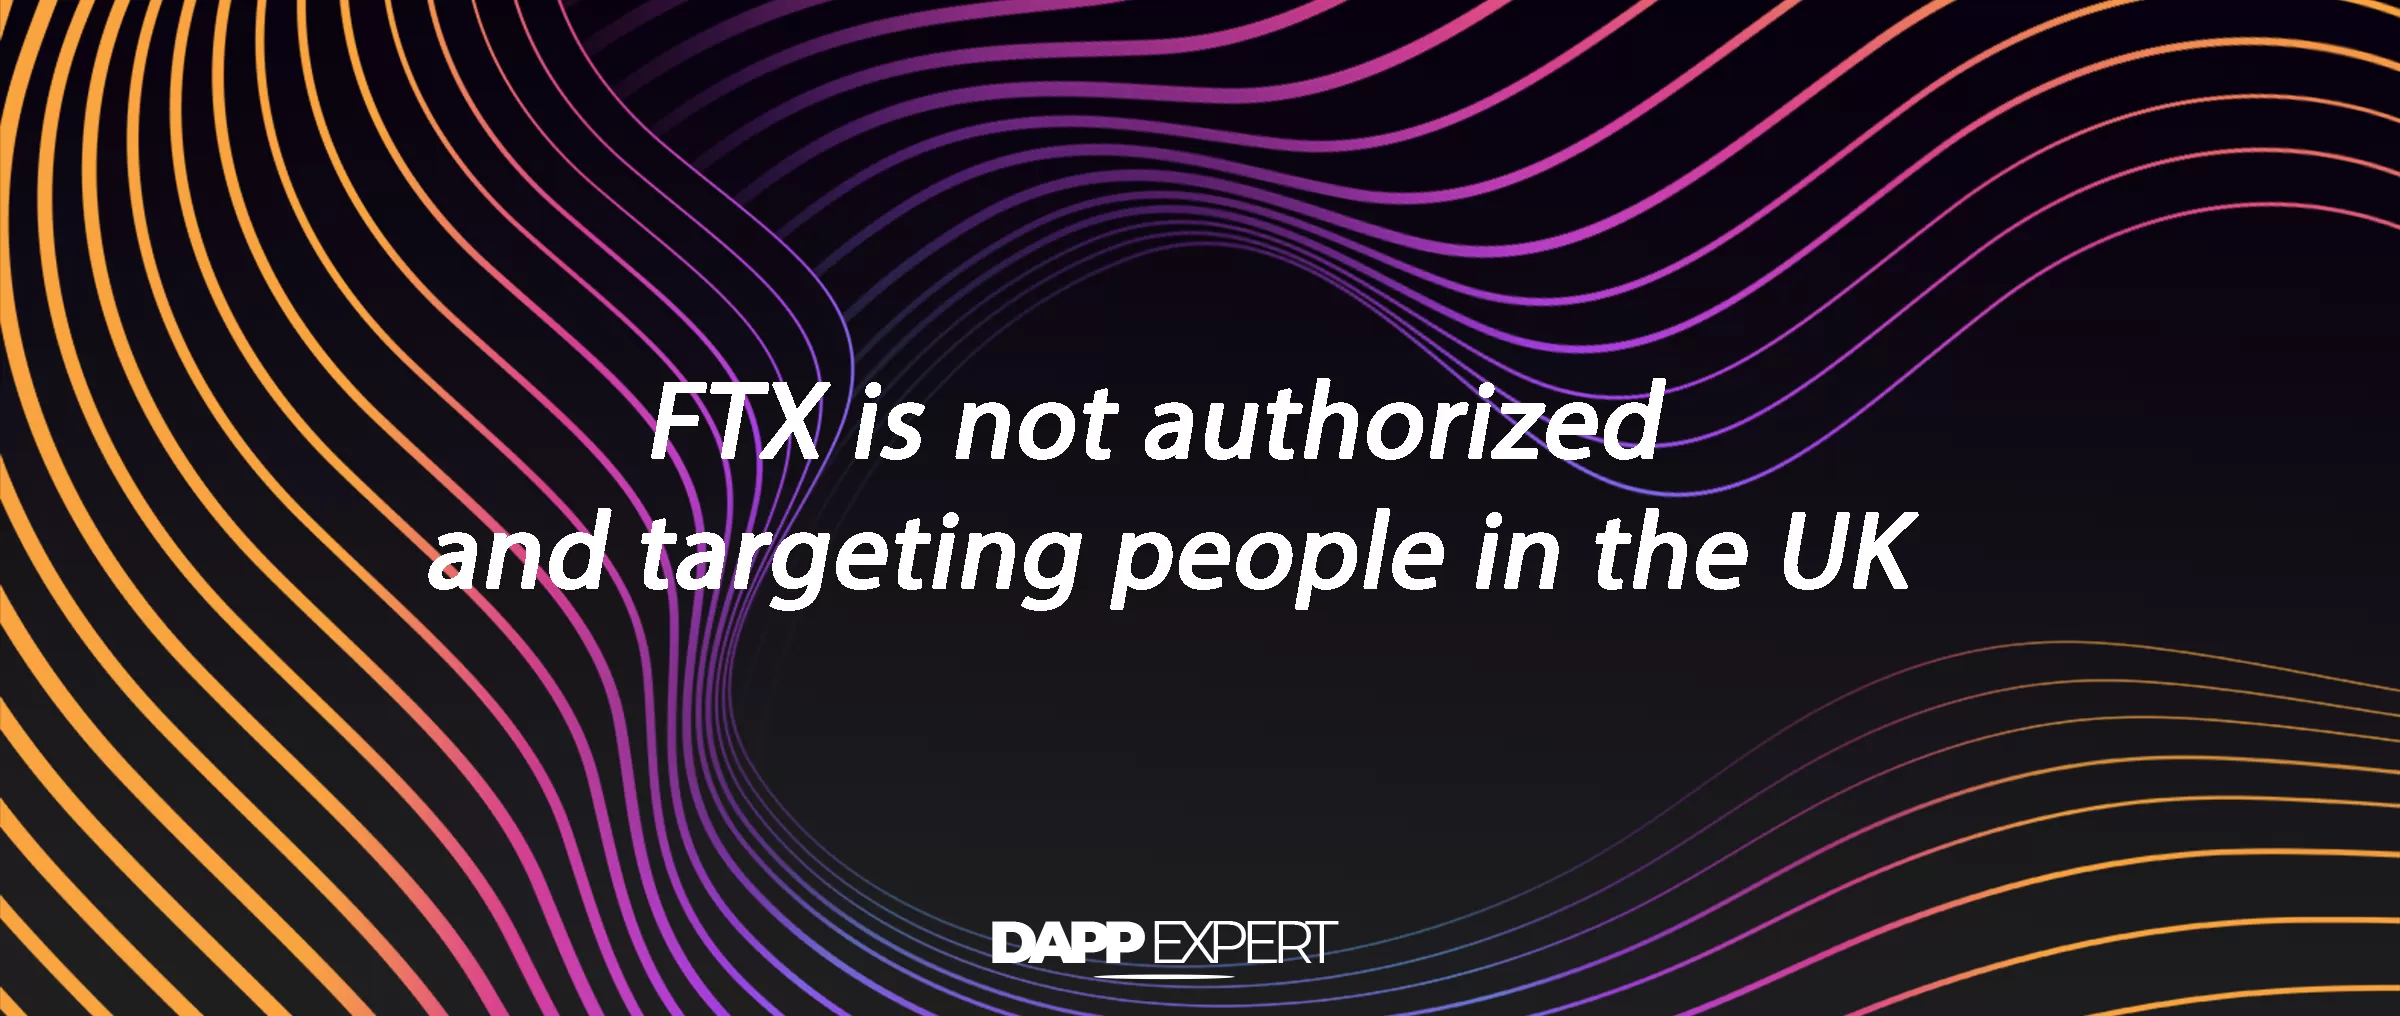 FTX is not authorized and targeting people in the UK